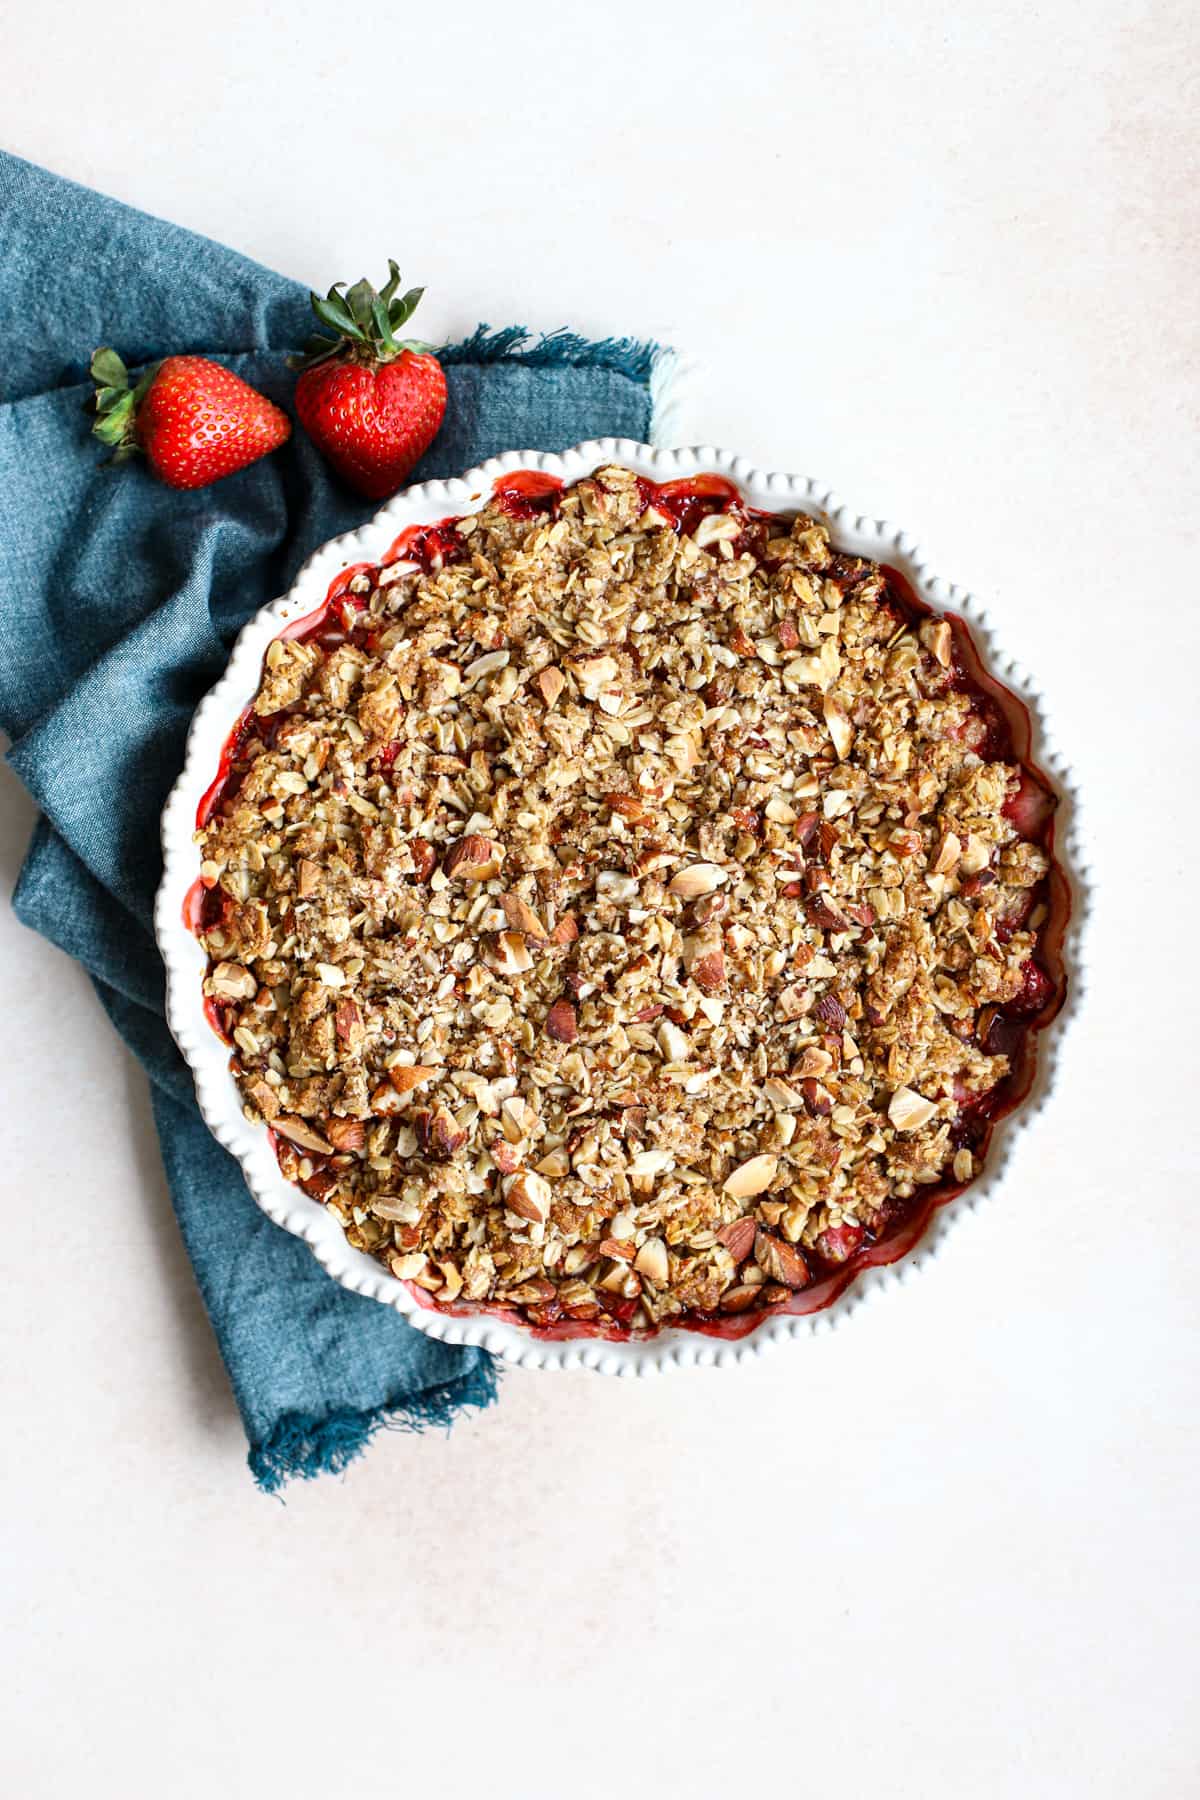 Healthy strawberry crisp in cream-colored baking dish next to teal linen on beige and white surface with two fresh strawberries on the side